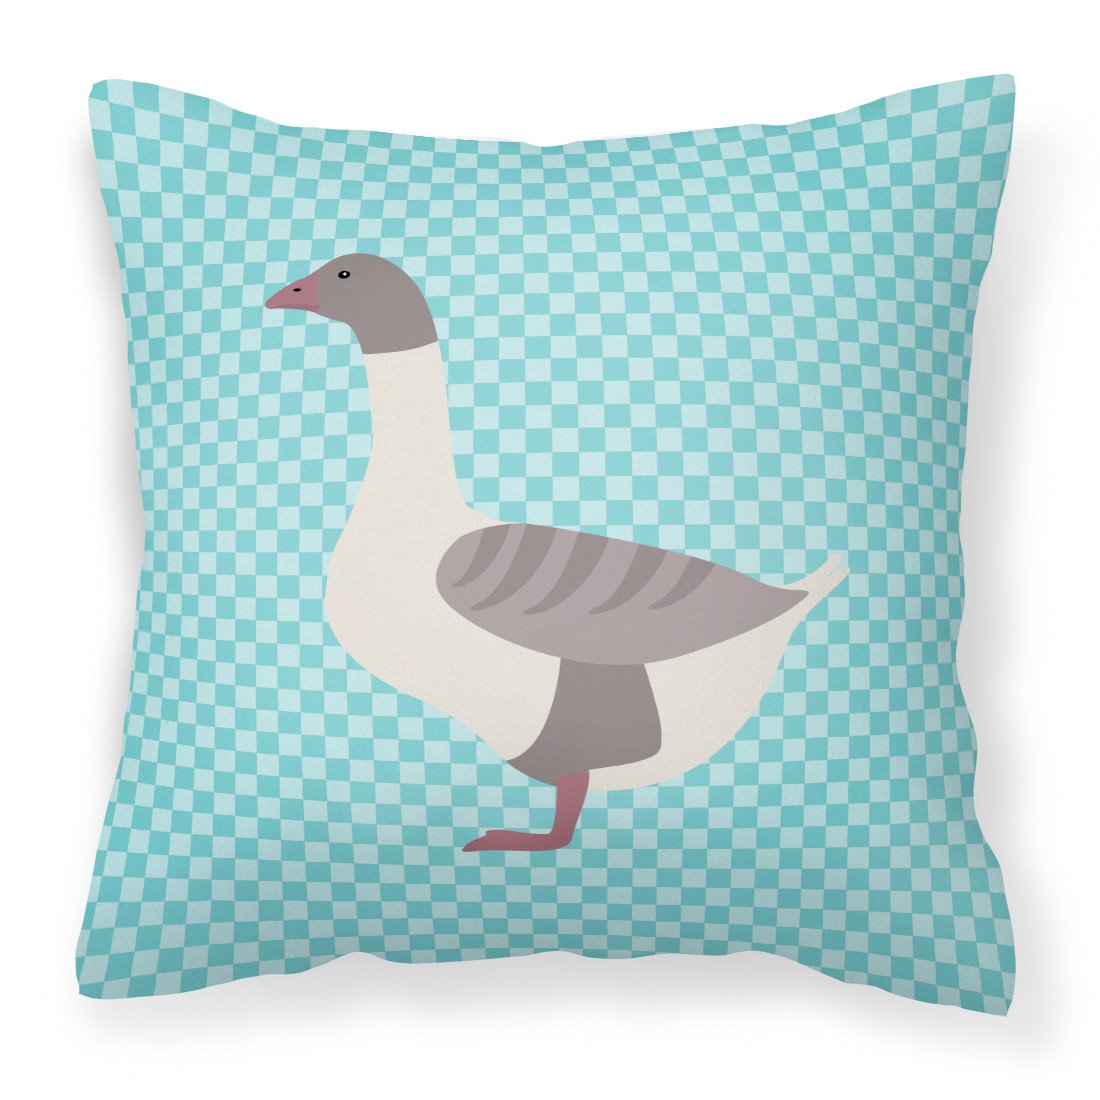 Buff Grey Back Goose Blue Check Fabric Decorative Pillow BB8075PW1818 by Caroline's Treasures